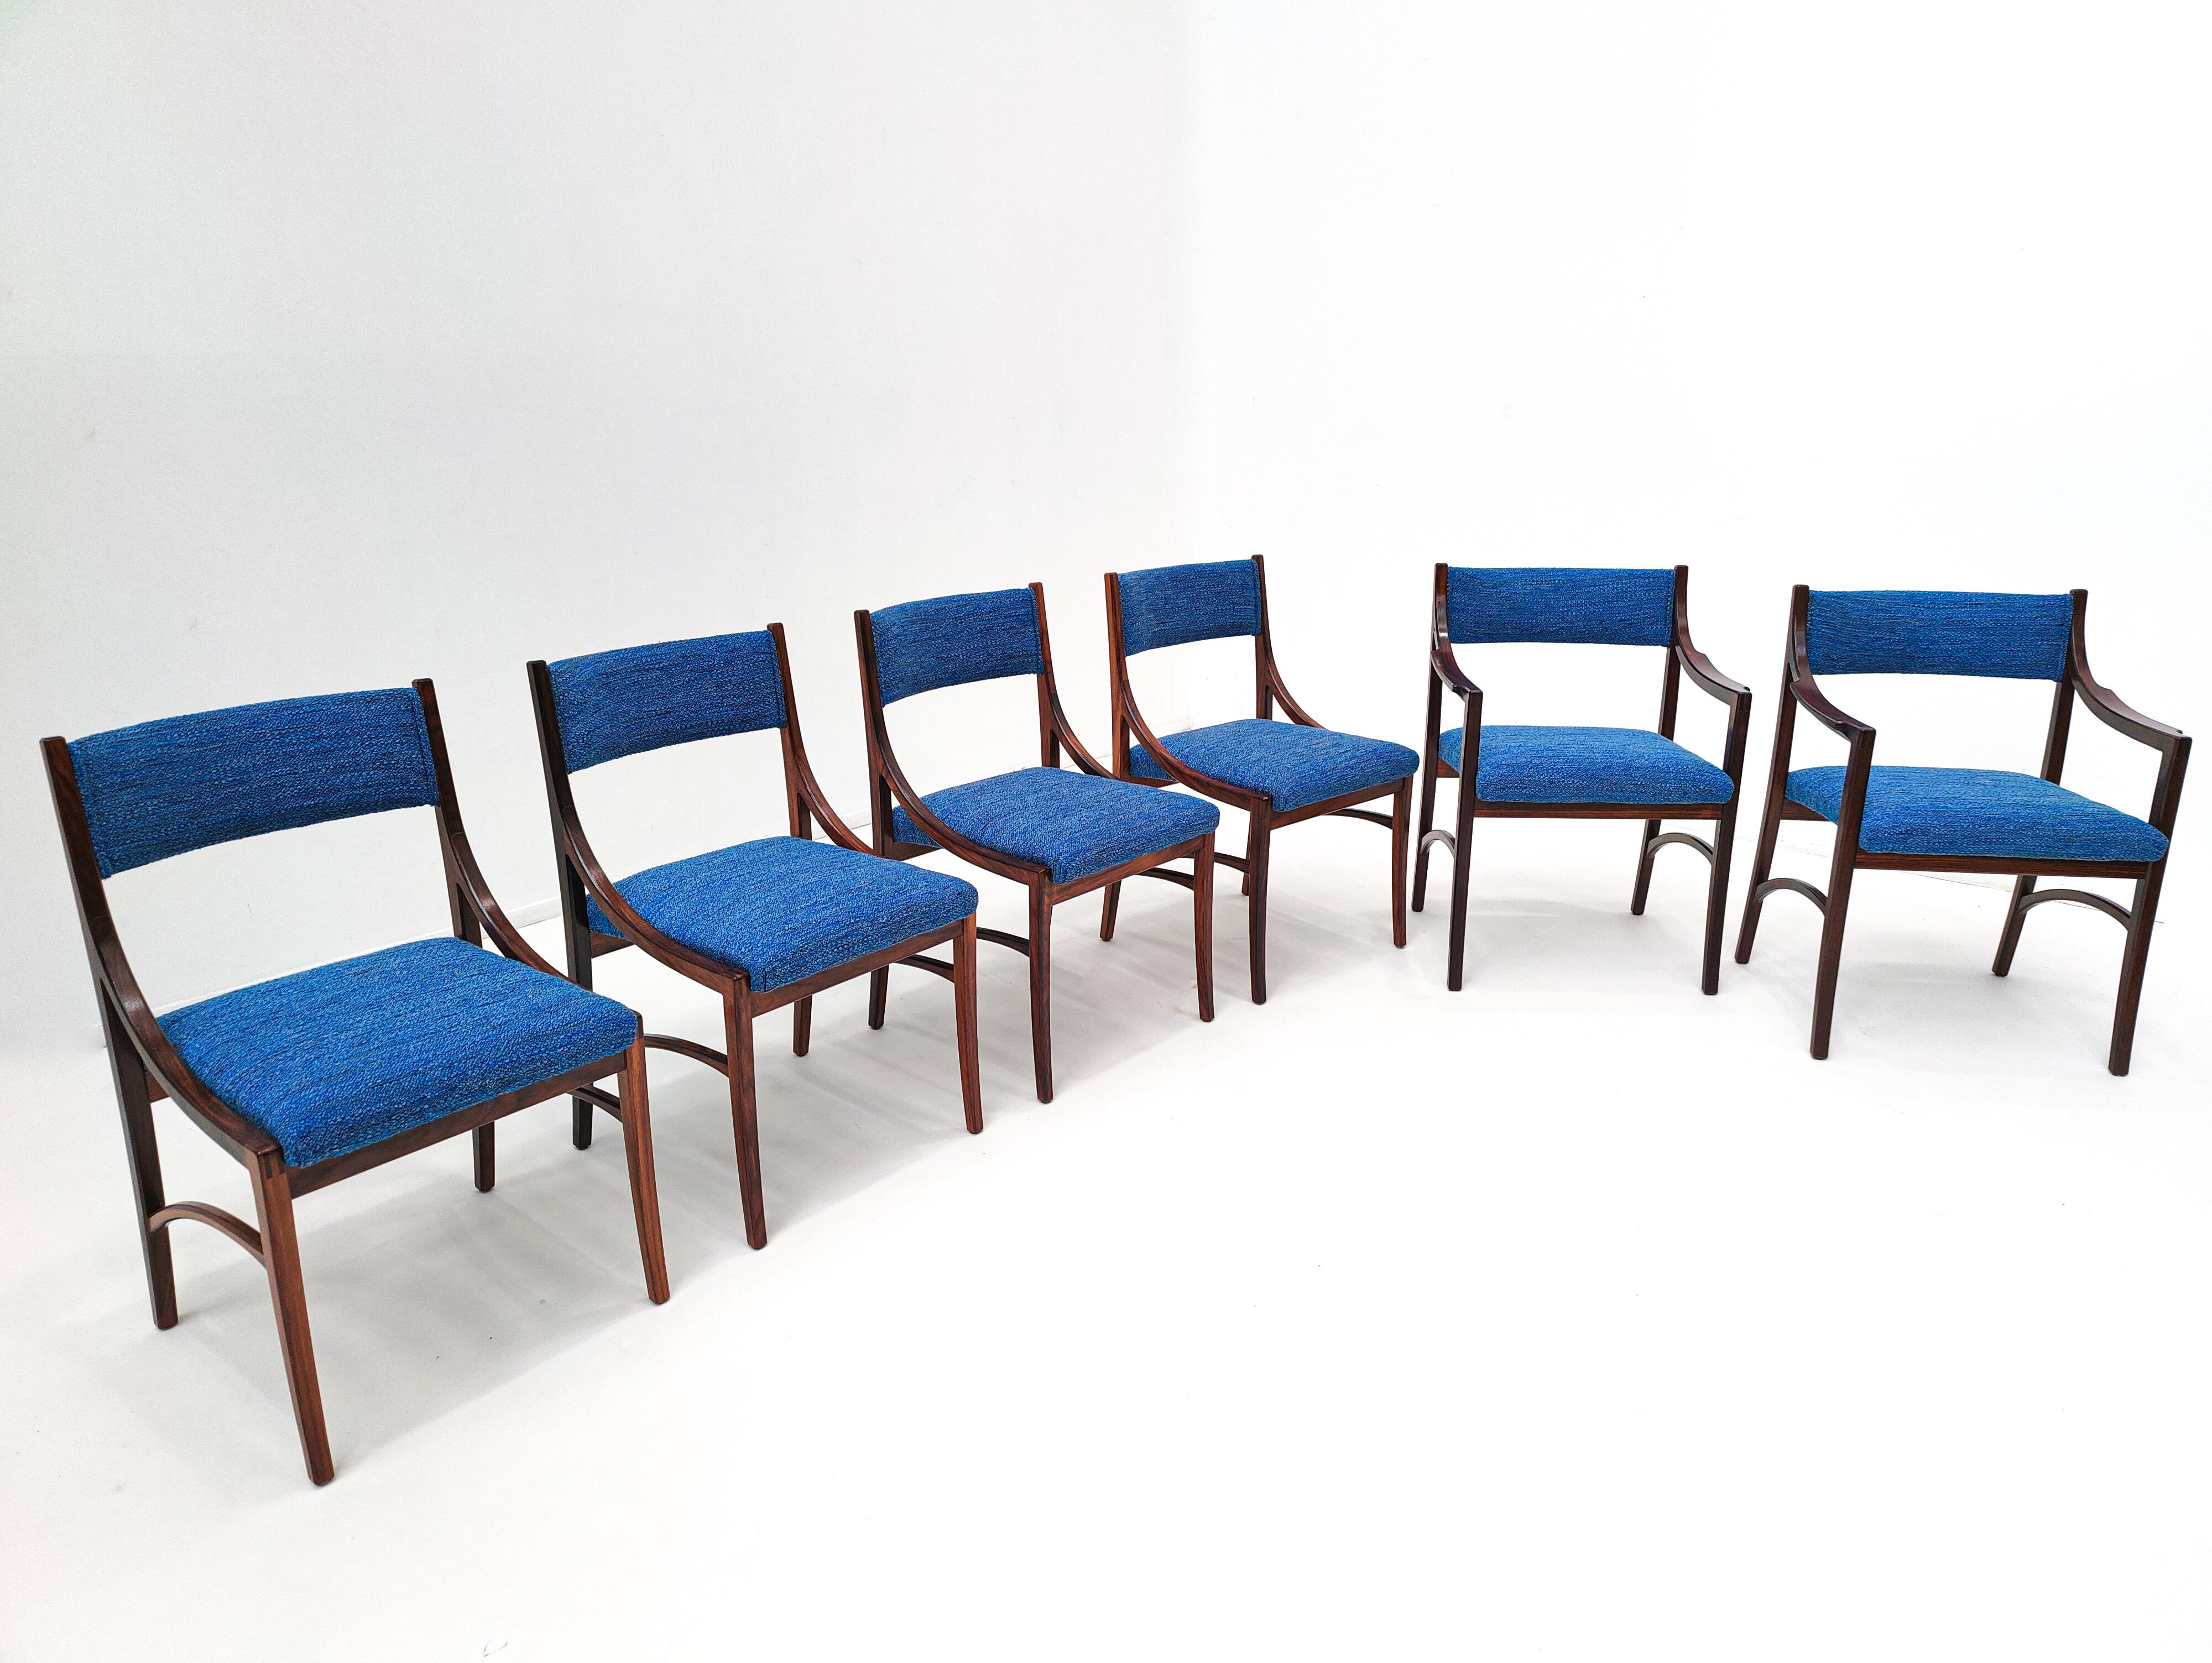 Mid-Century Modern set of 4 chairs and 2 armchairs Model 110 by Ico Parisi, blue, Italy, 1960s
European design.